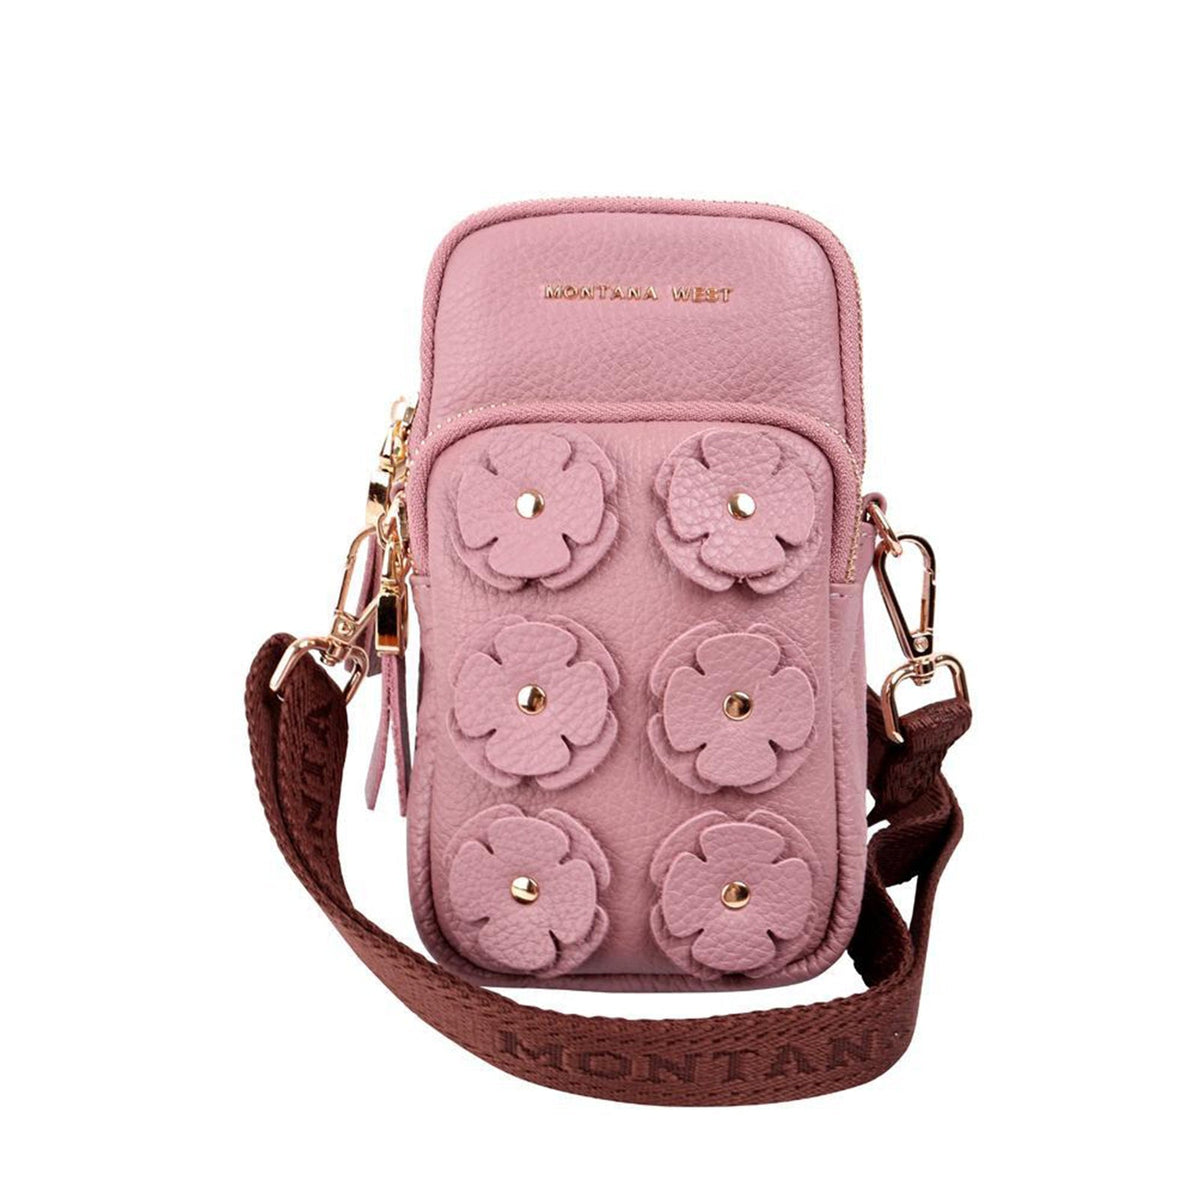 Montana West Genuine Leather Floral Applique Cellphone Crossbody Bag - Cowgirl Wear